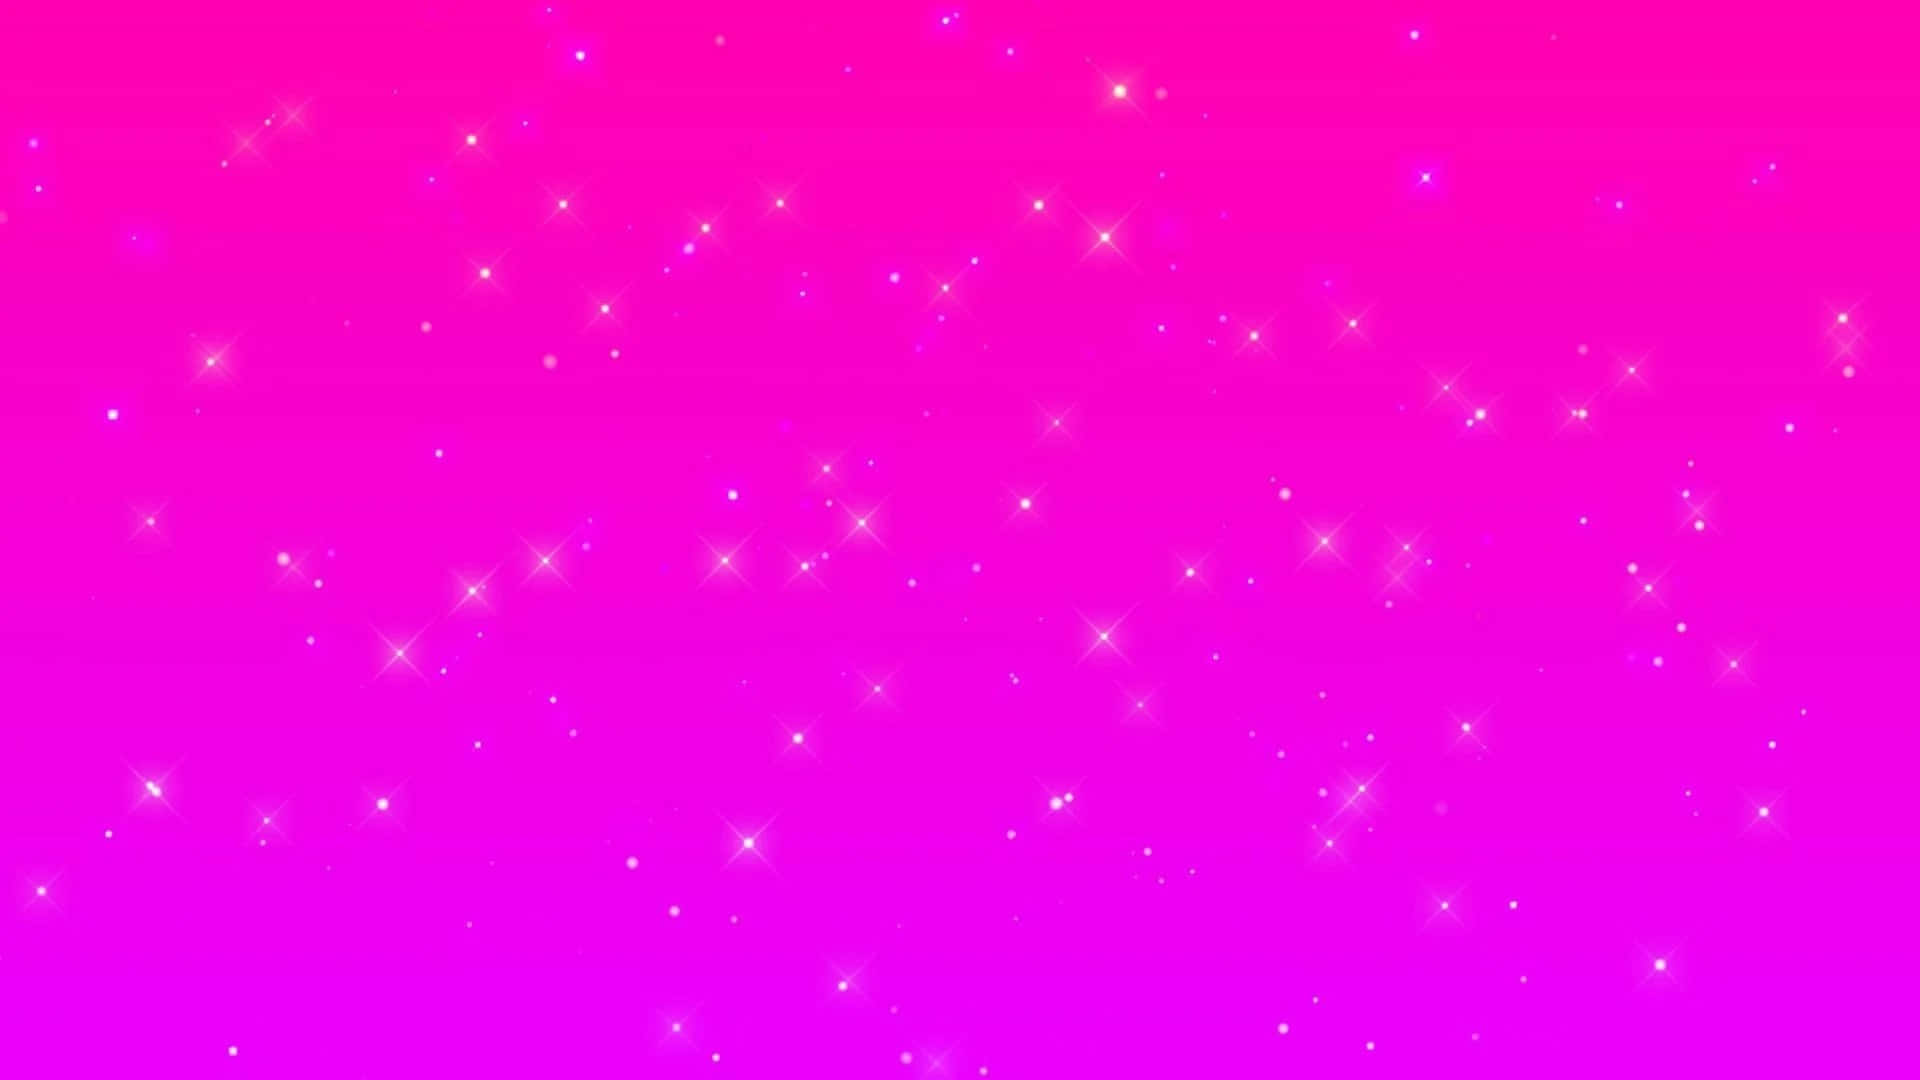 200+] Hot Pink Backgrounds